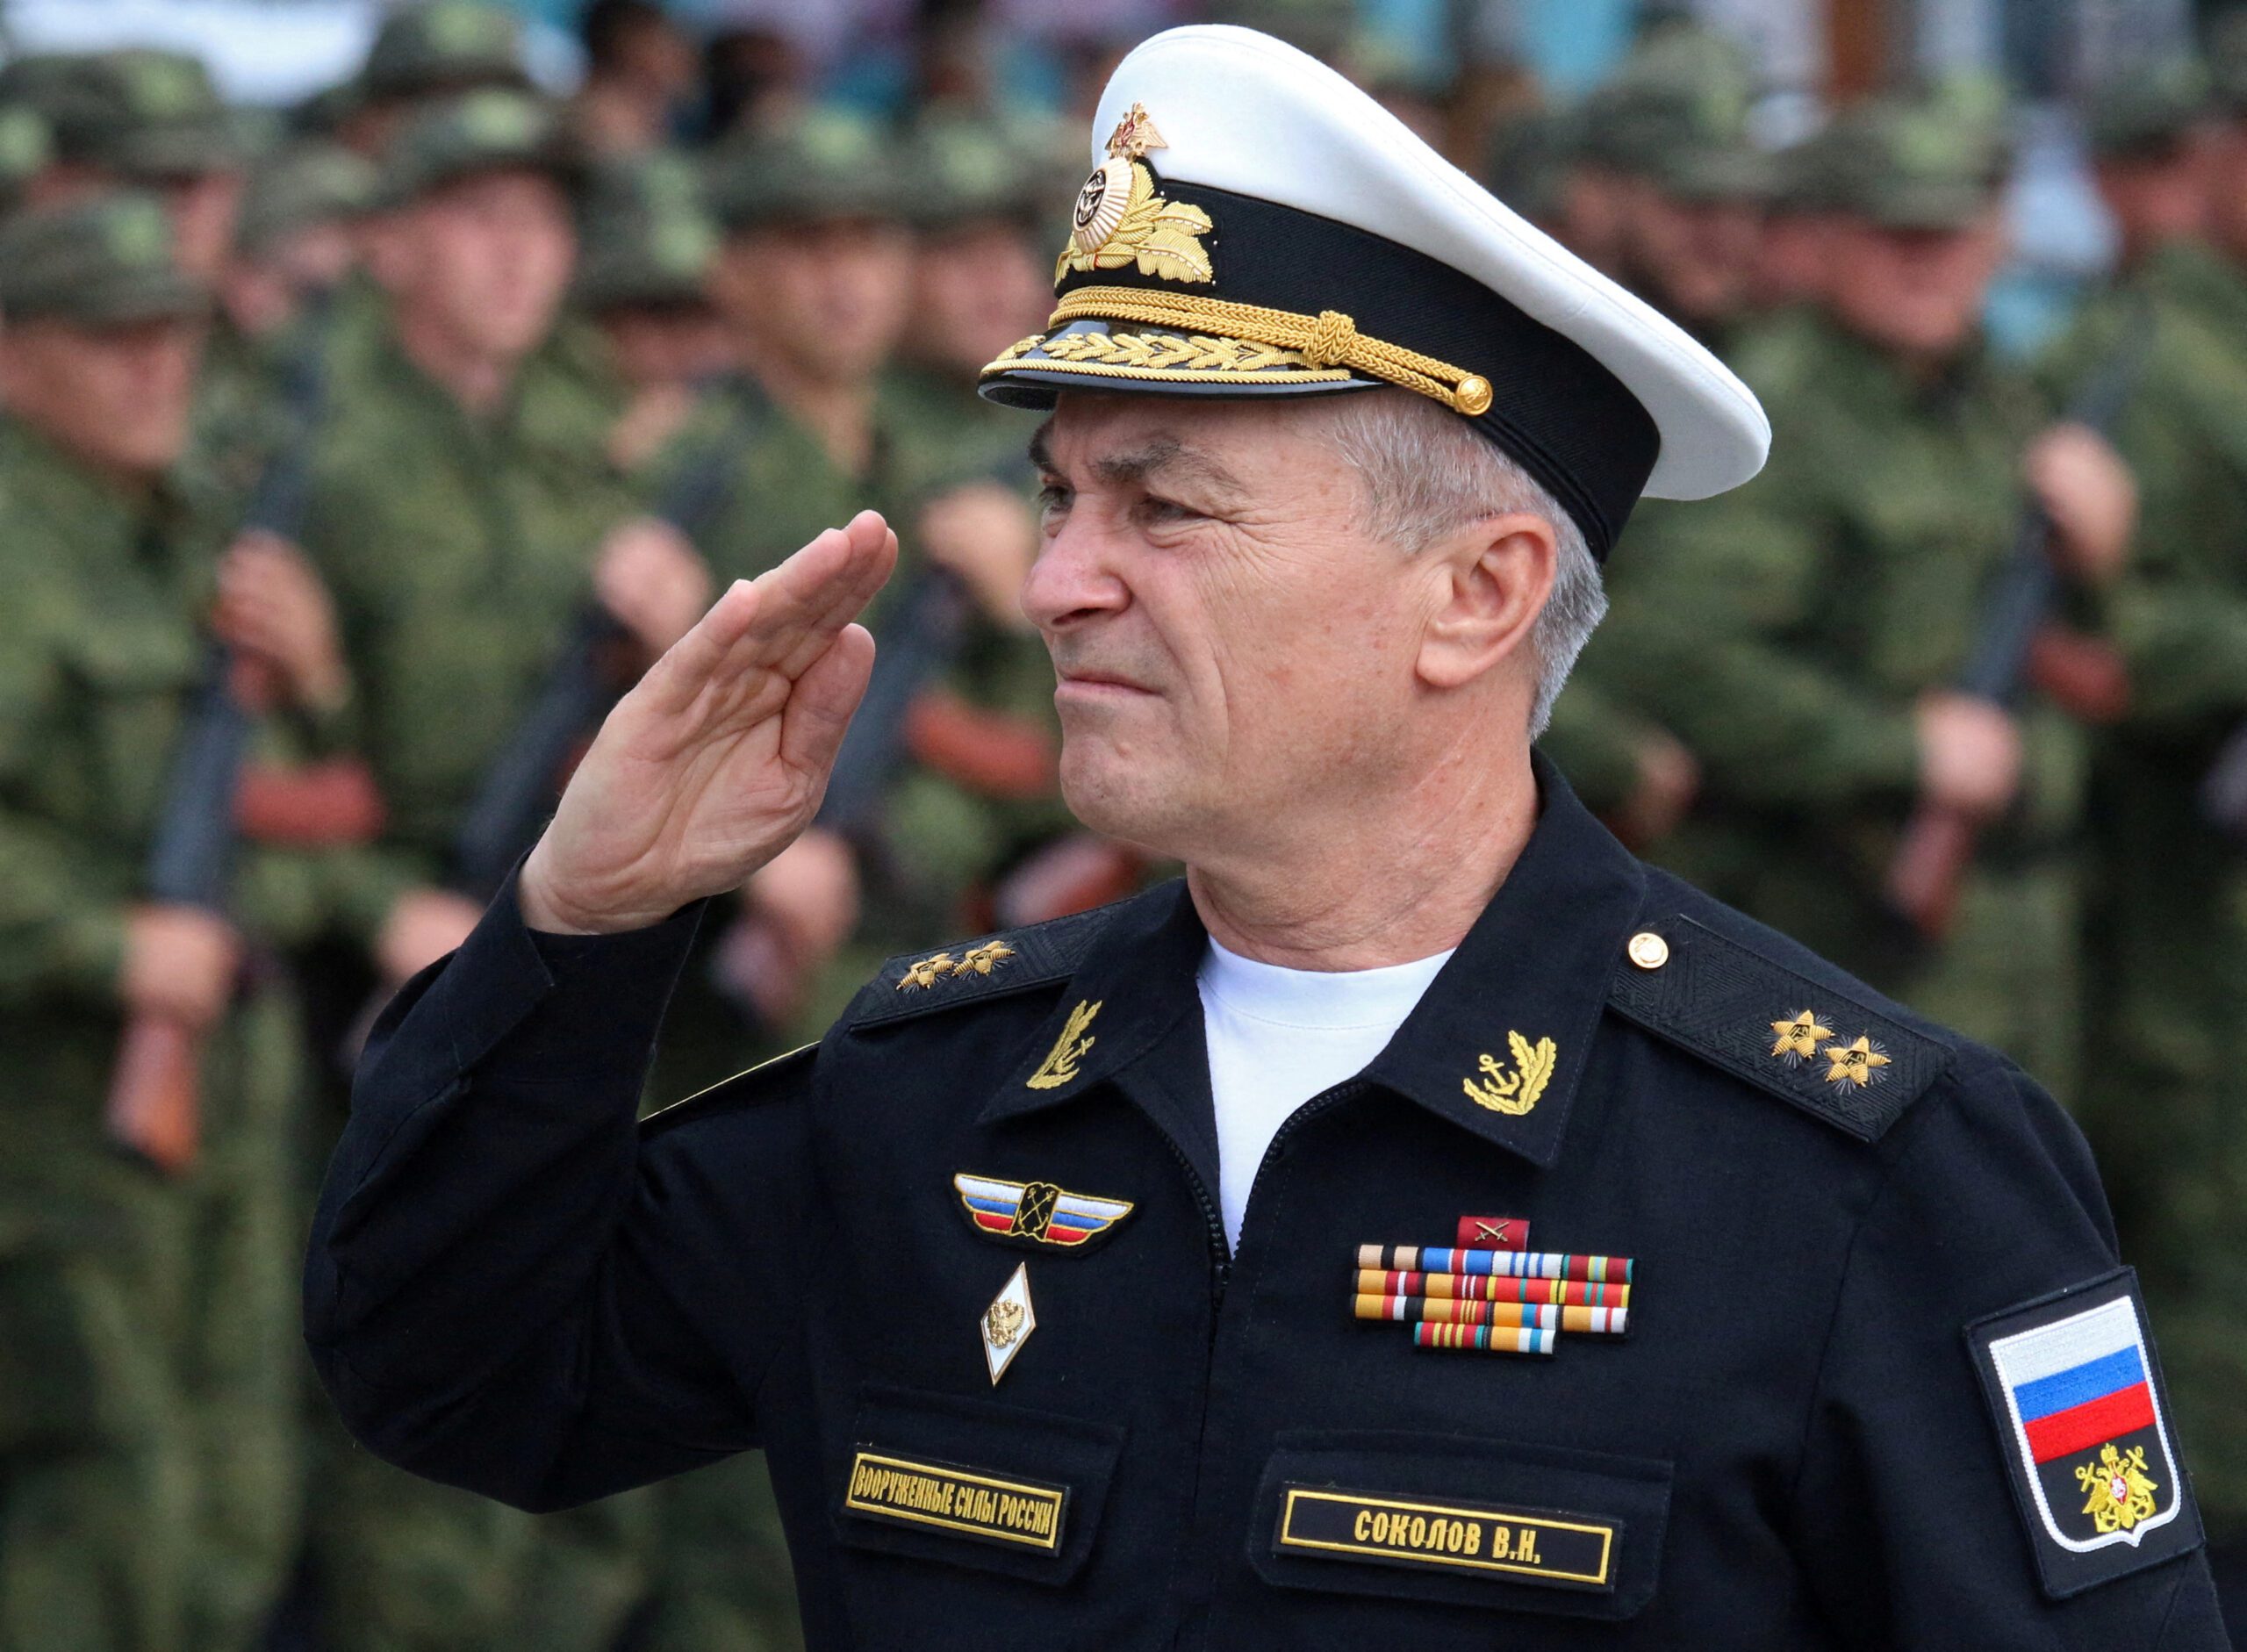 FILE PHOTO: Commander of the Russian Black Sea Fleet Vice-Admiral Viktor Sokolov salutes during a send-off ceremony for reservists drafted during partial mobilisation, in Sevastopol, Crimea September 27, 2022. REUTERS/Alexey Pavlishak/File Photo